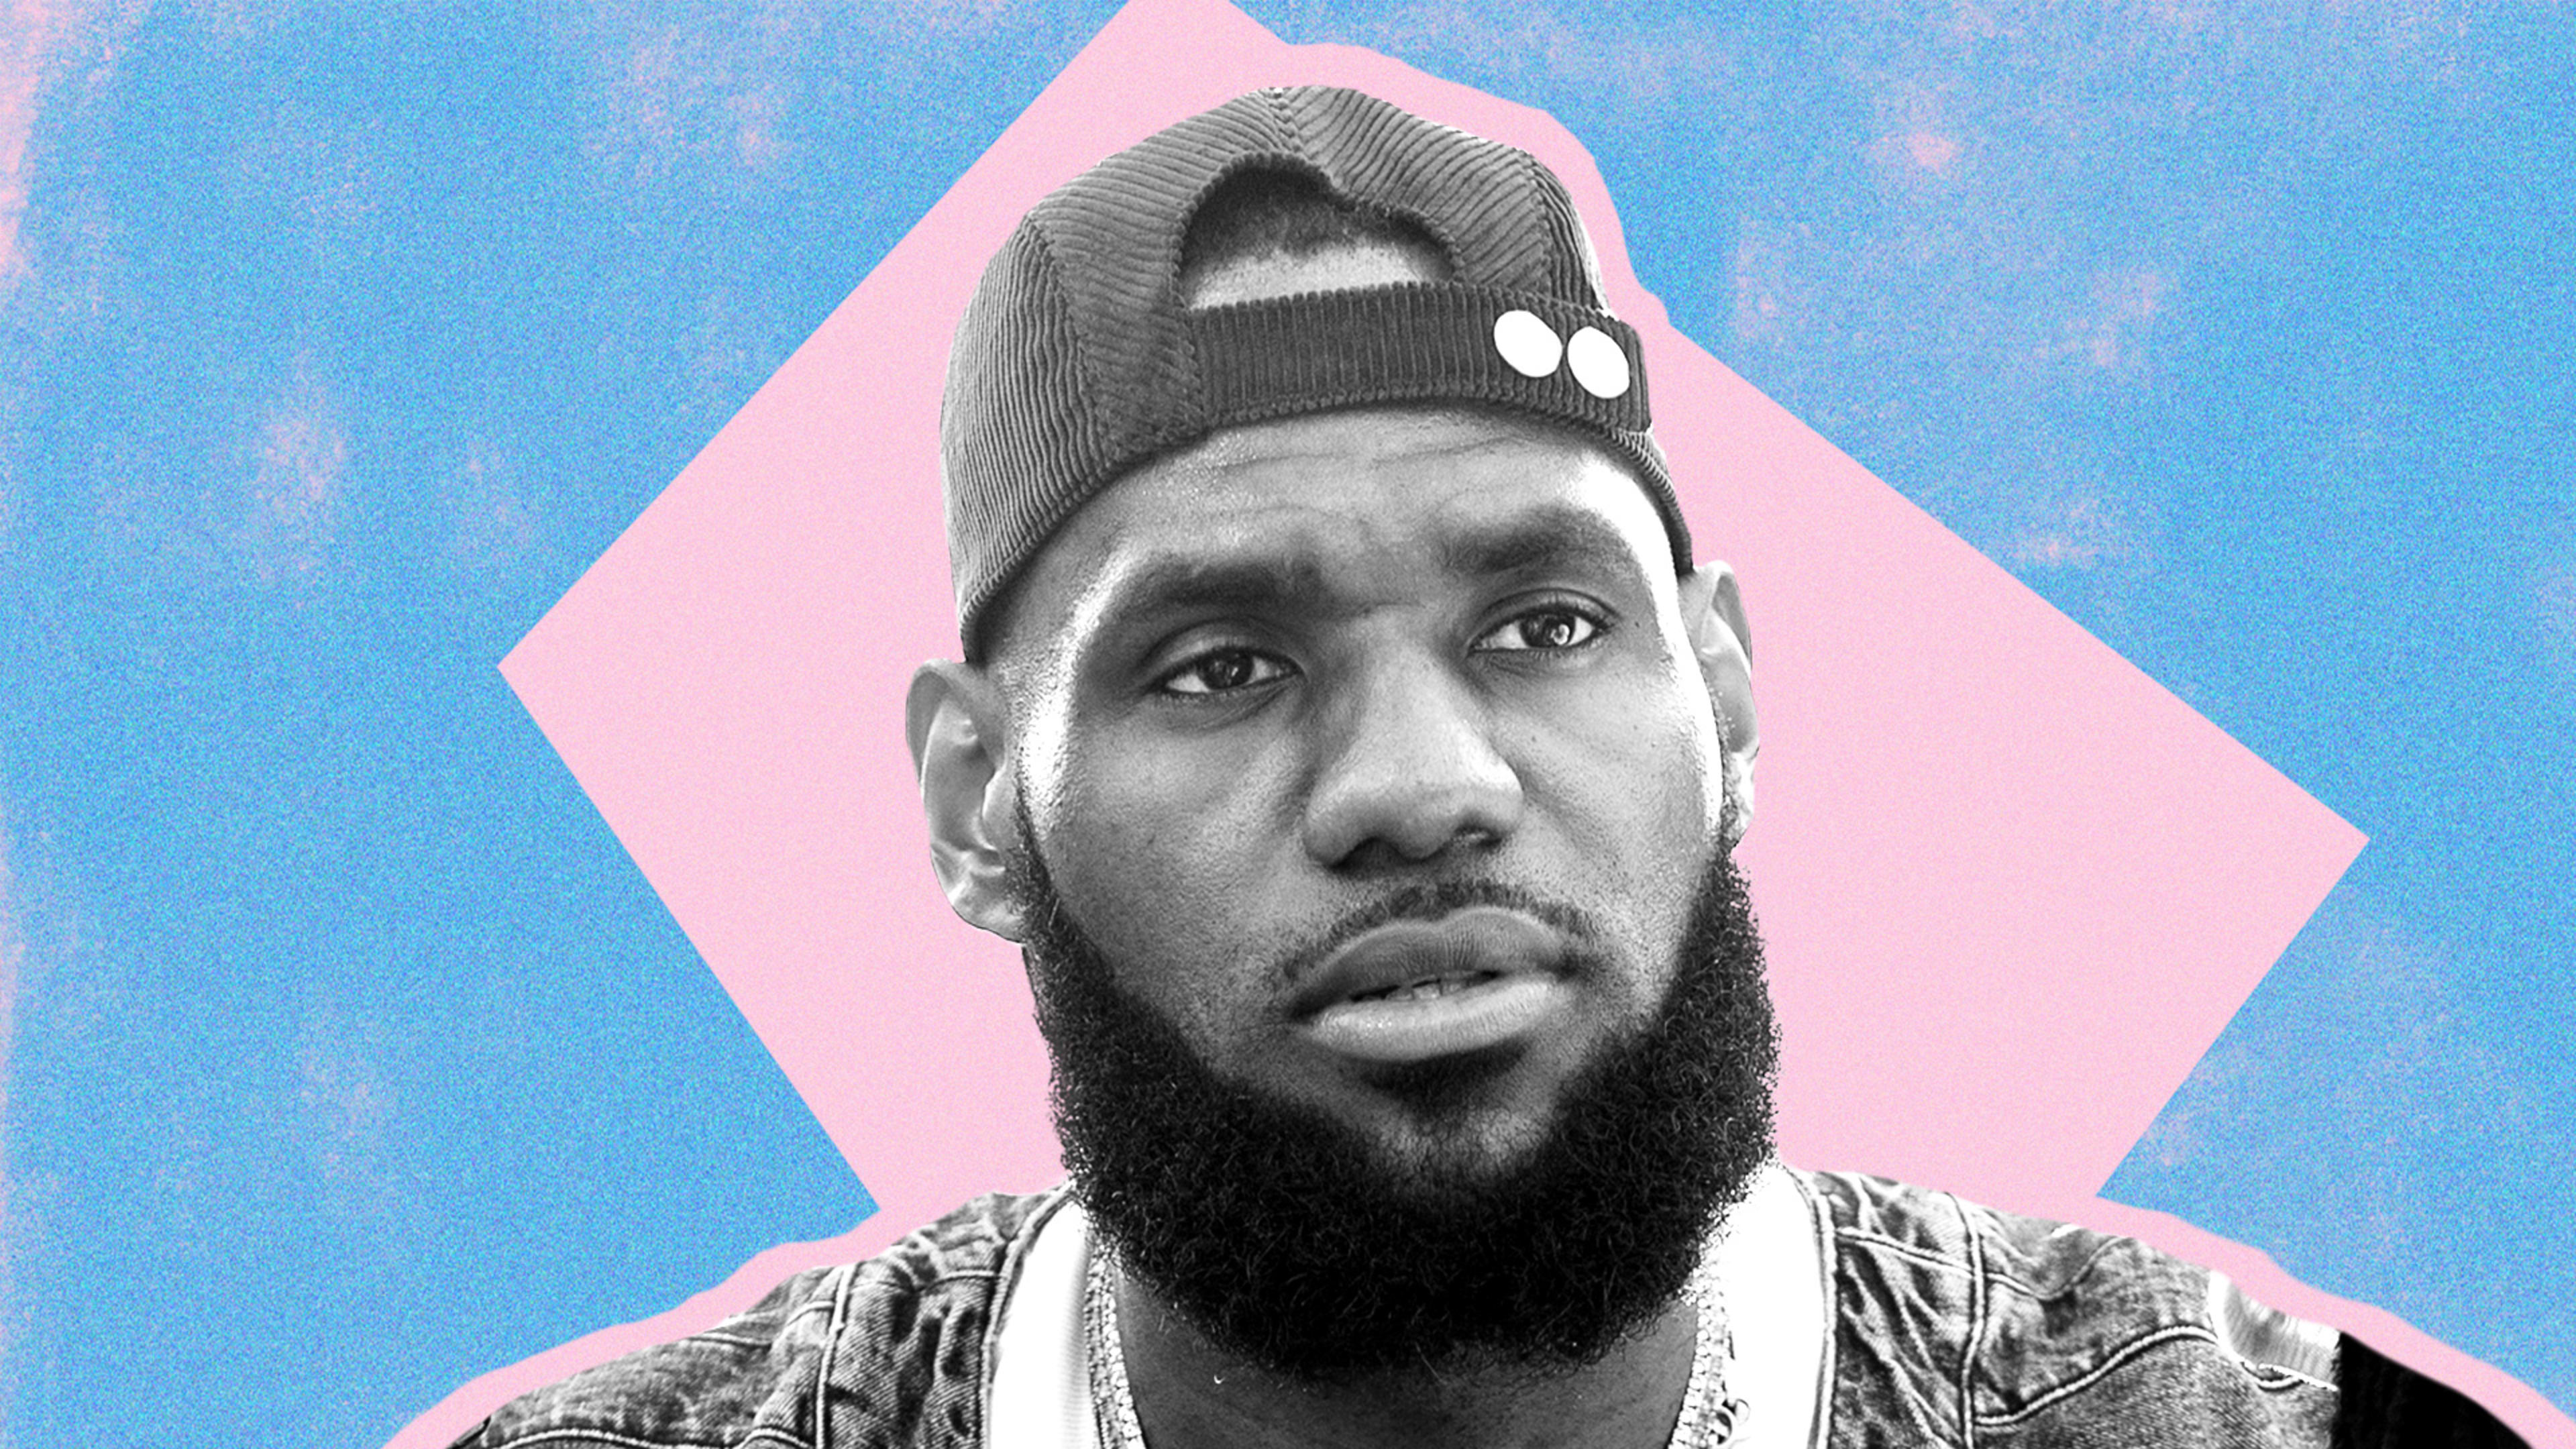 LeBron James partners with Calm to improve your mental fitness